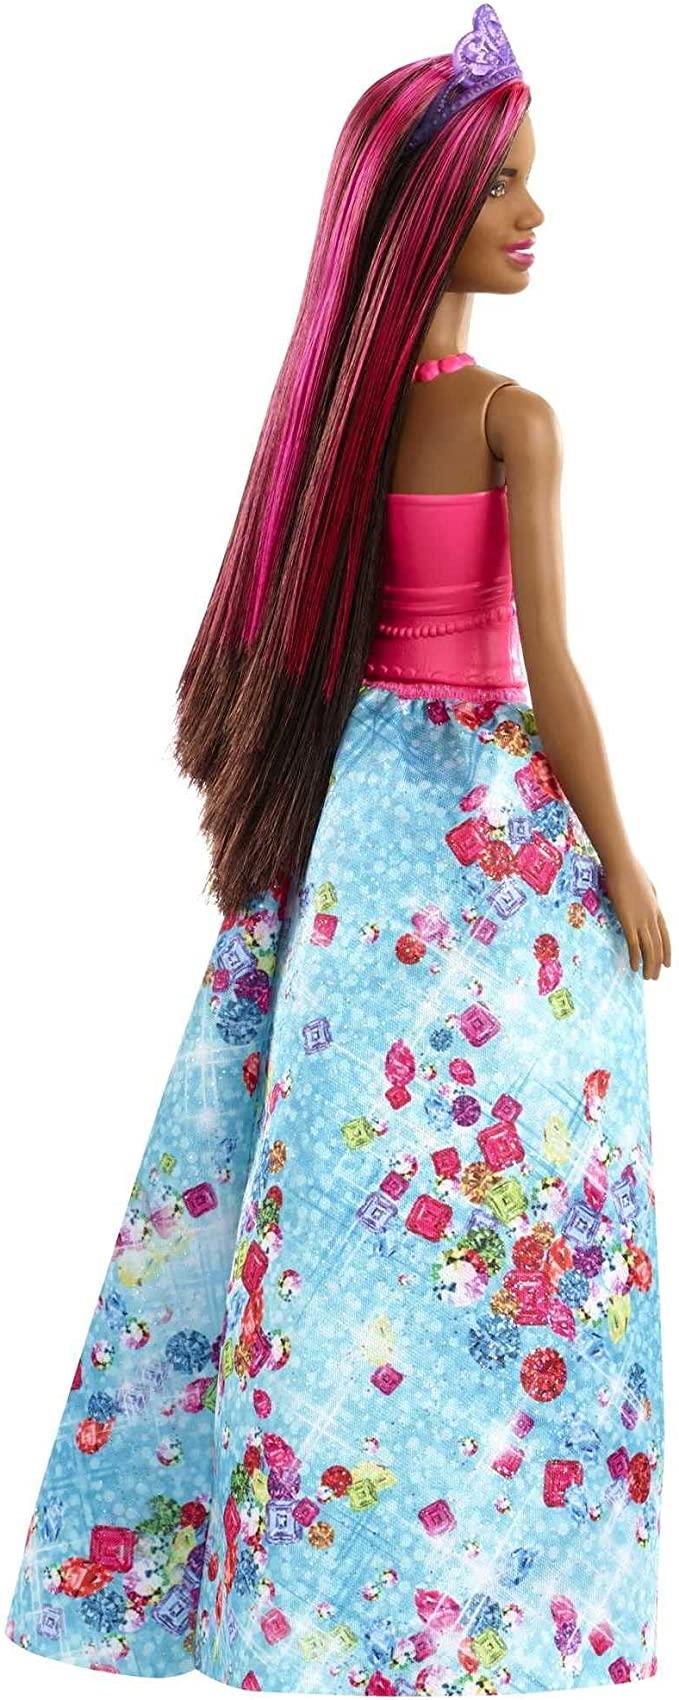 Barbie Dreamtopia Doll & Accessories, Brunette Hair with Removable Blue  Skirt, Shoes 